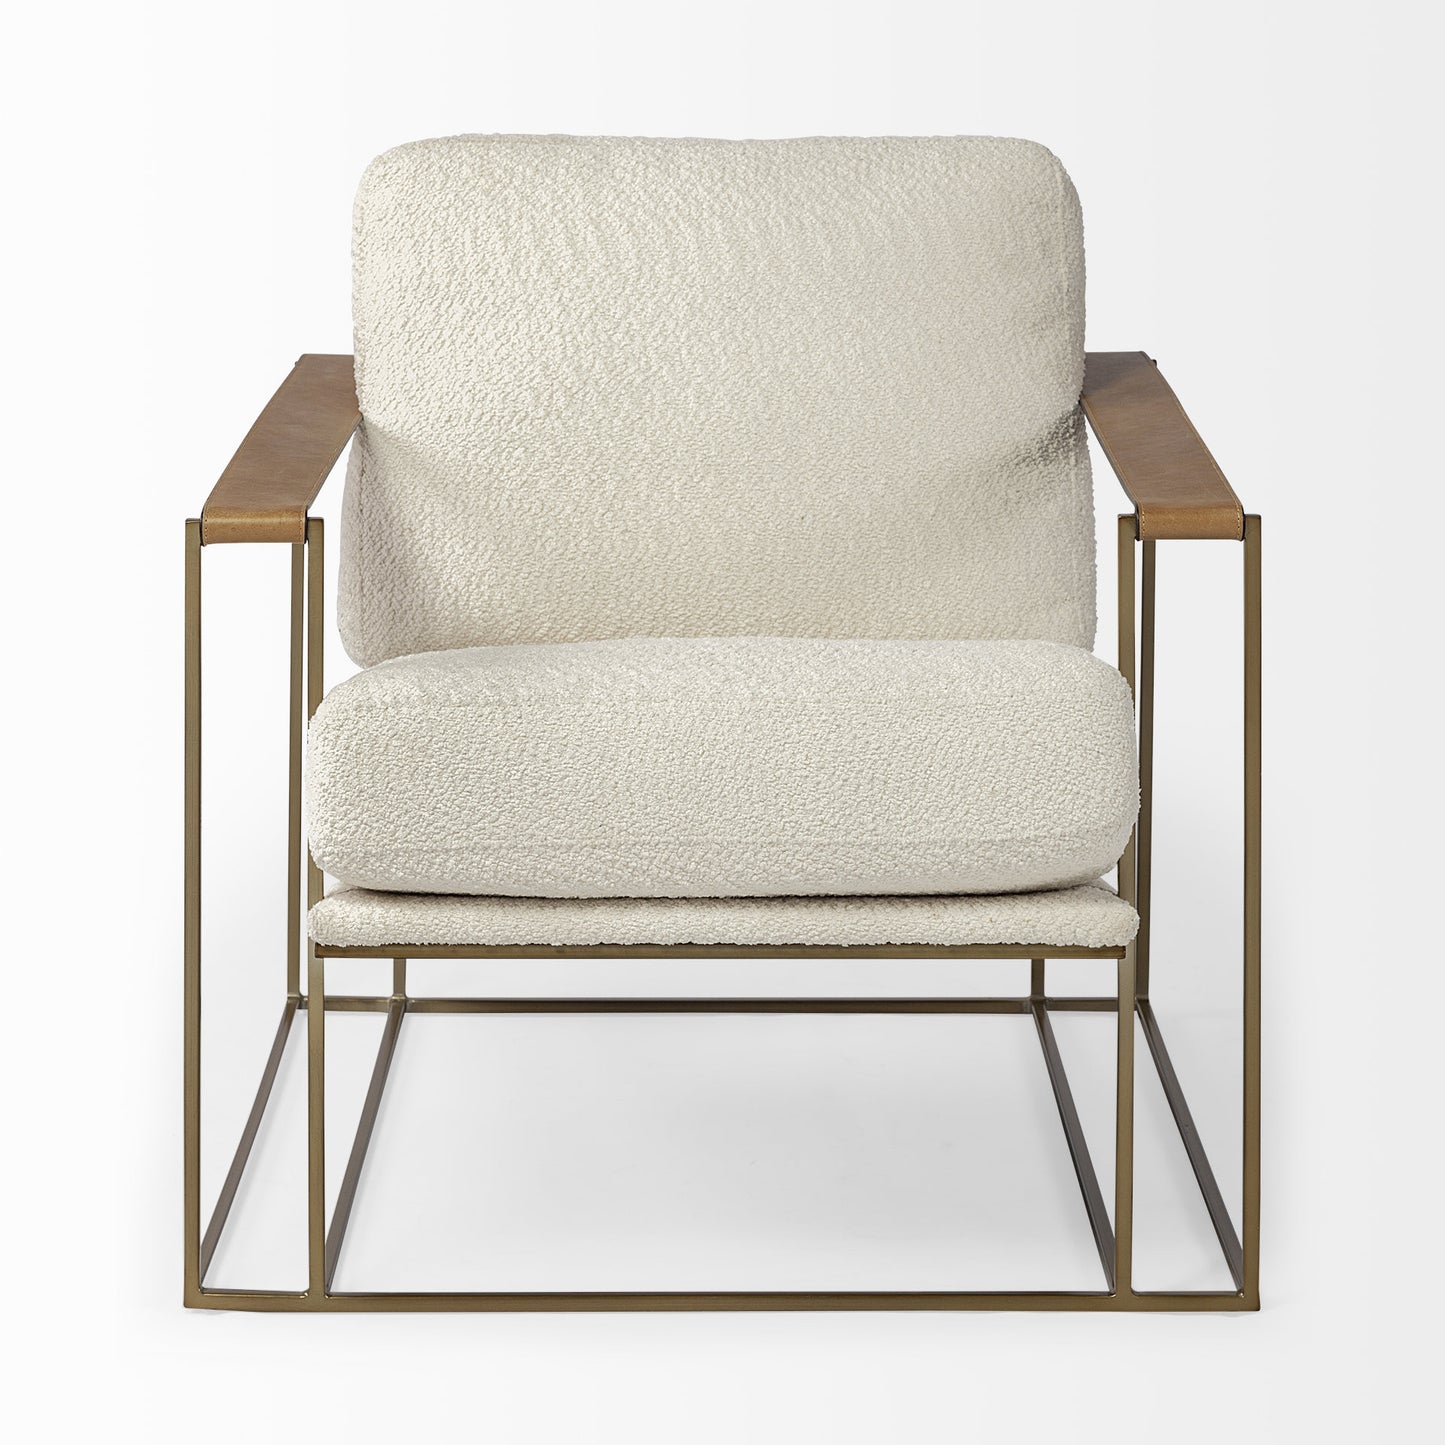 34" Cream And Wood Brown Linen Arm Chair